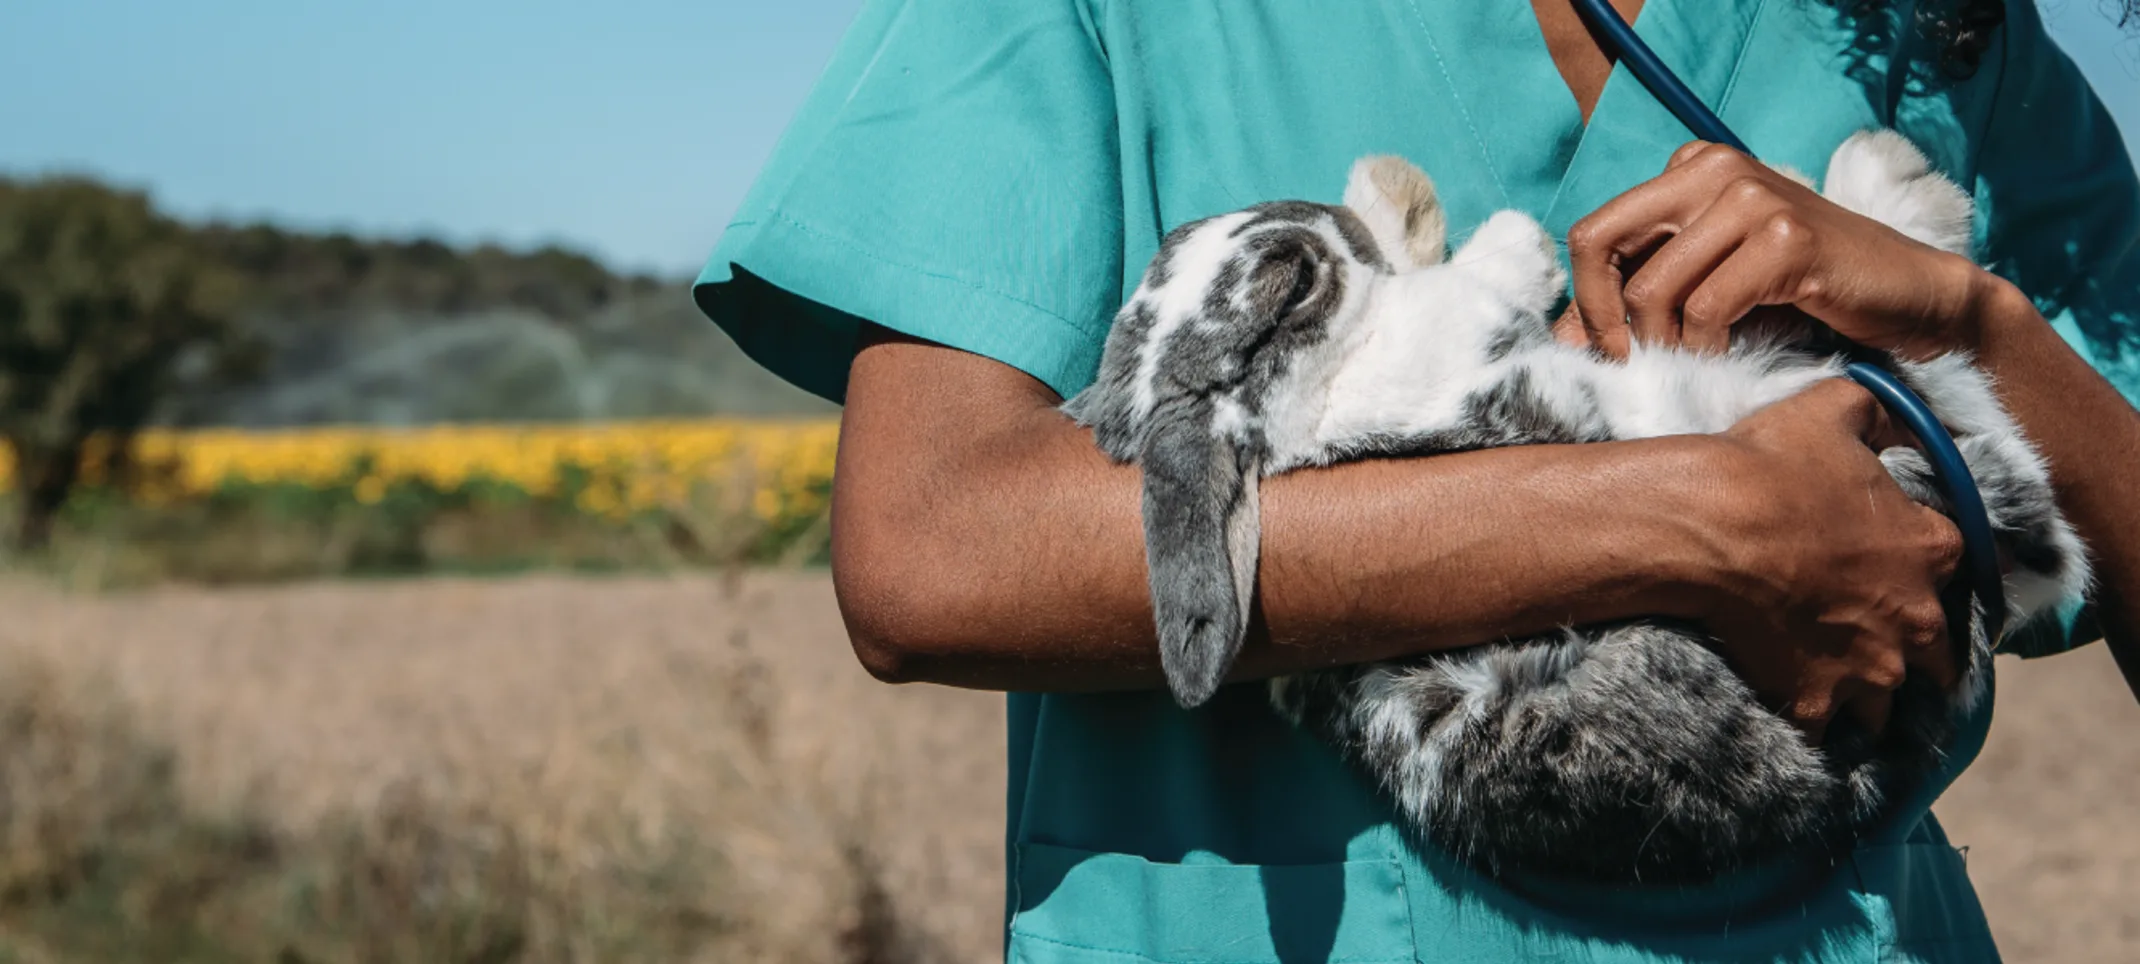 Woman holding rabbit while outside